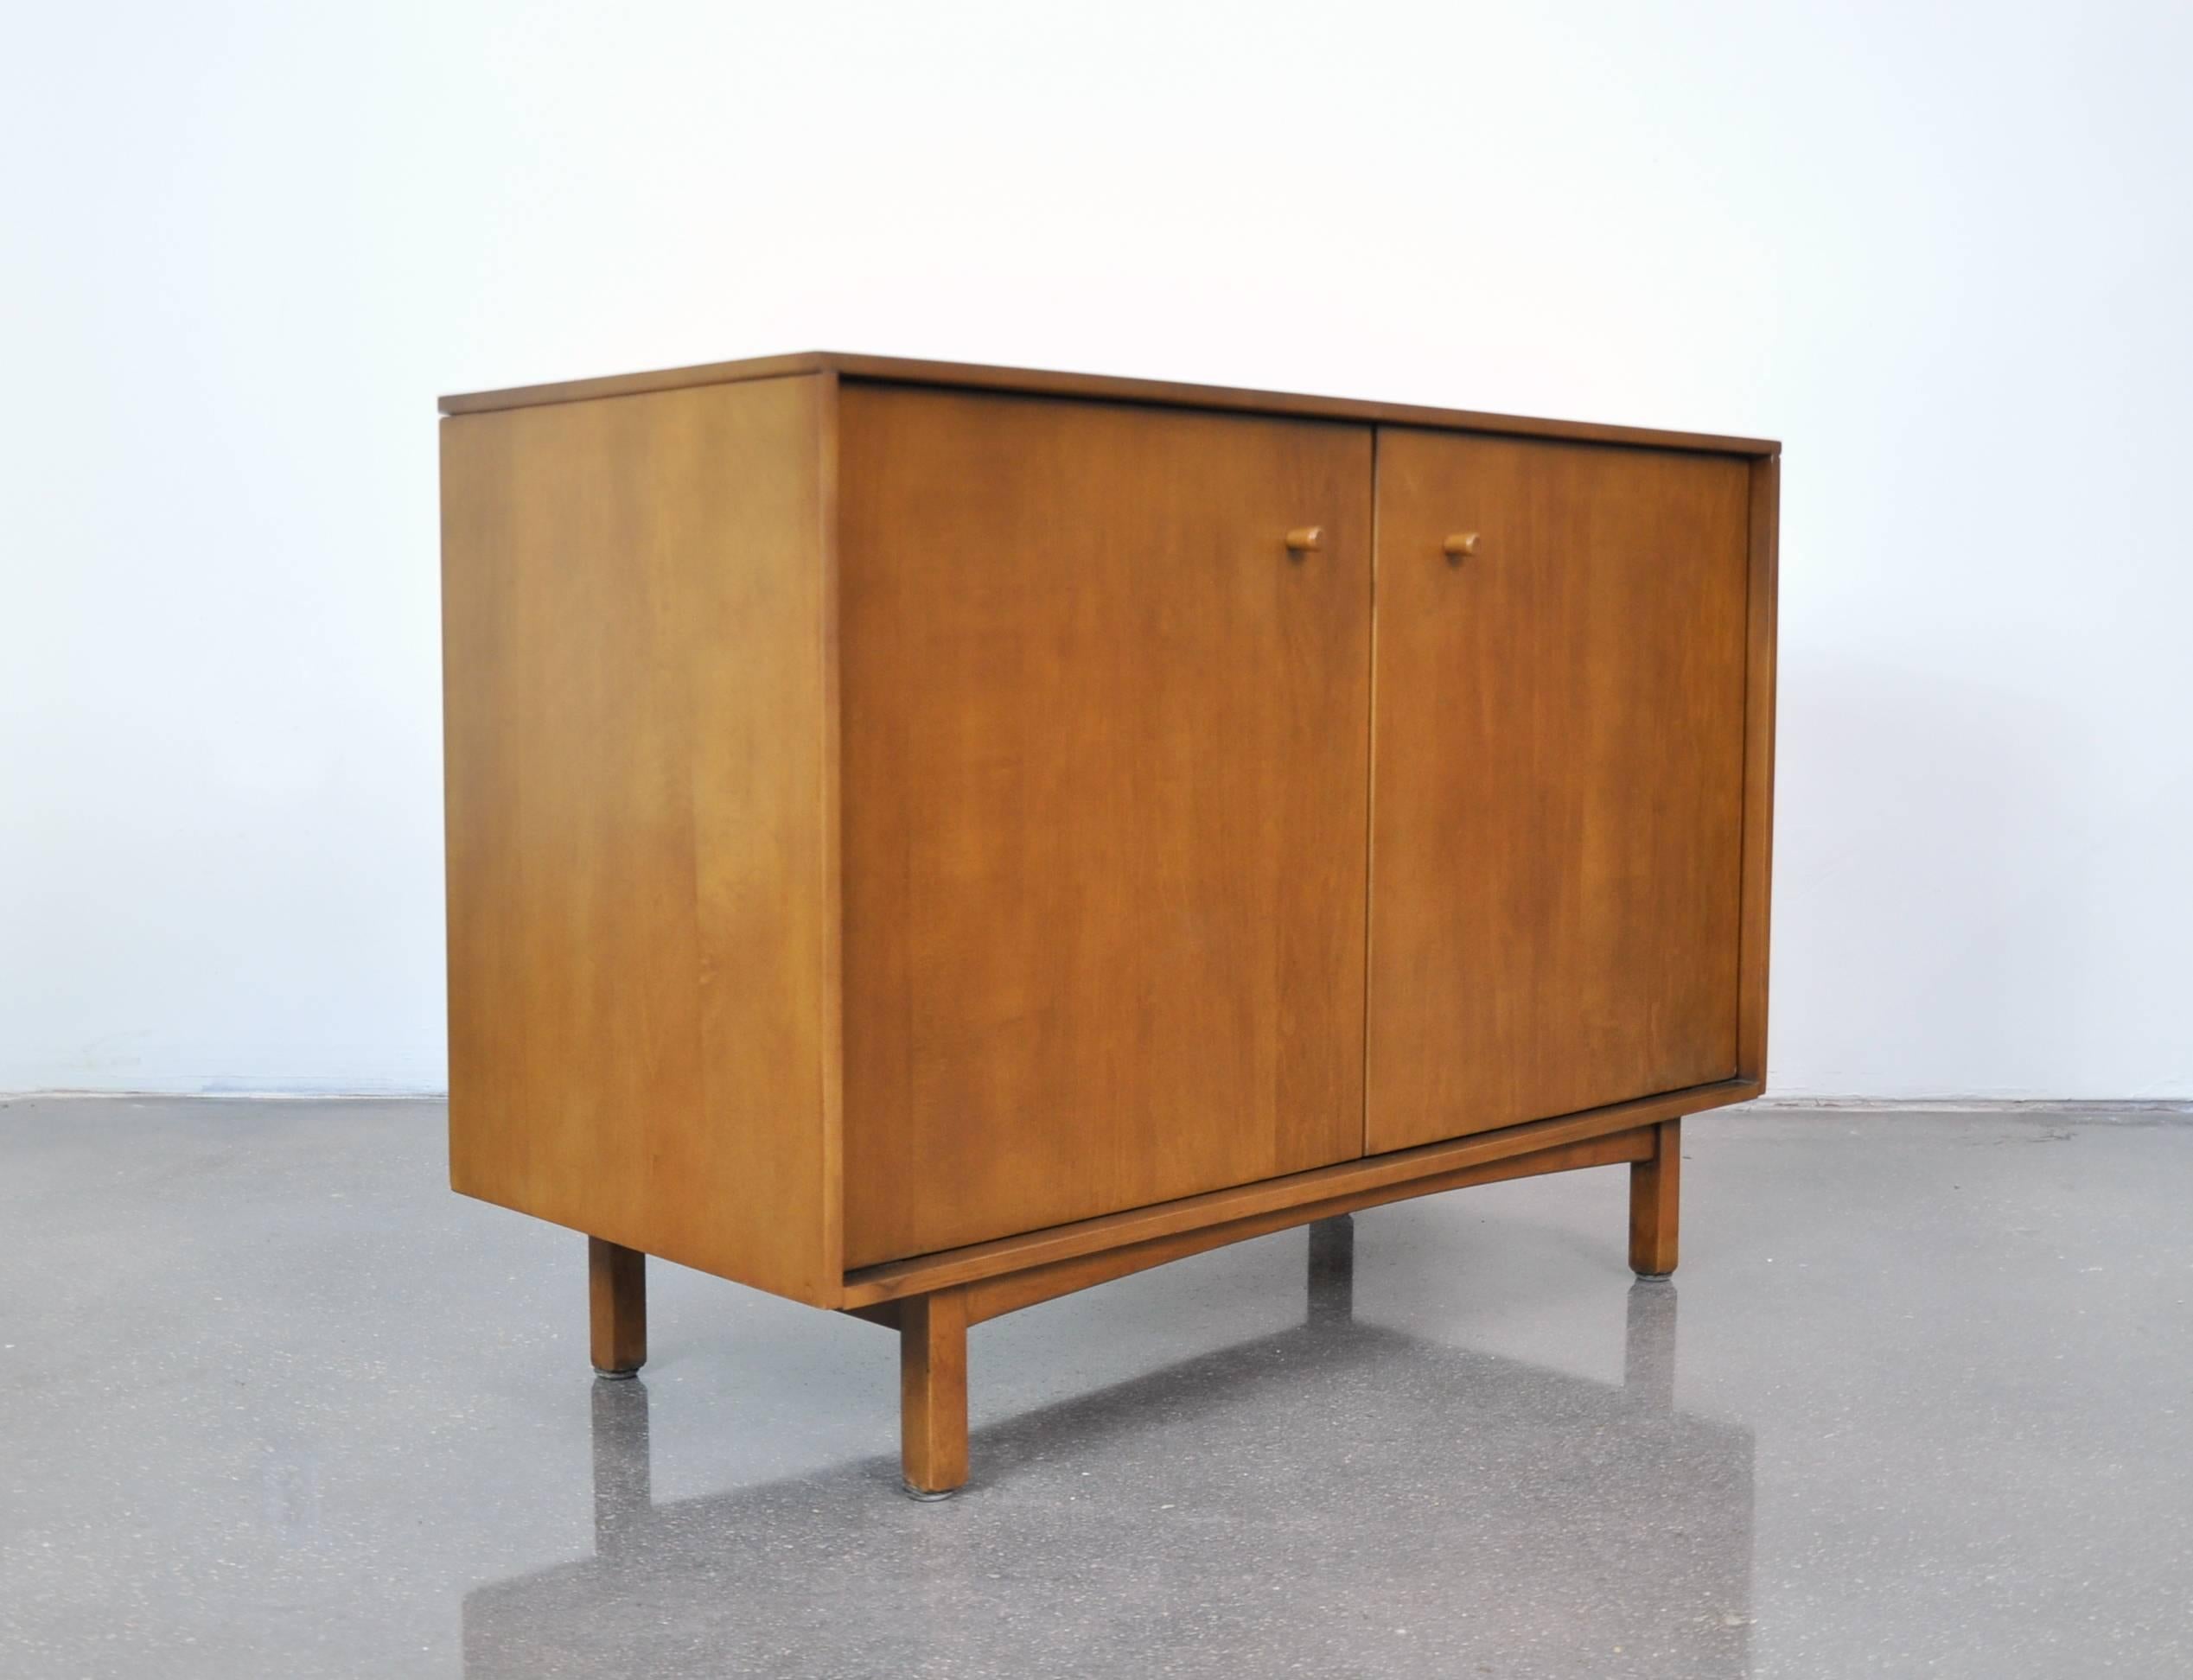 A rare Mid-Century Modern maple bar cabinet designed by Milo Baughman in the early 1950s as part of the Milo Baughman Collection, and manufactured by Murray Furniture Manufacturing Company in WInchendon, Massachusetts. This petite sideboard features